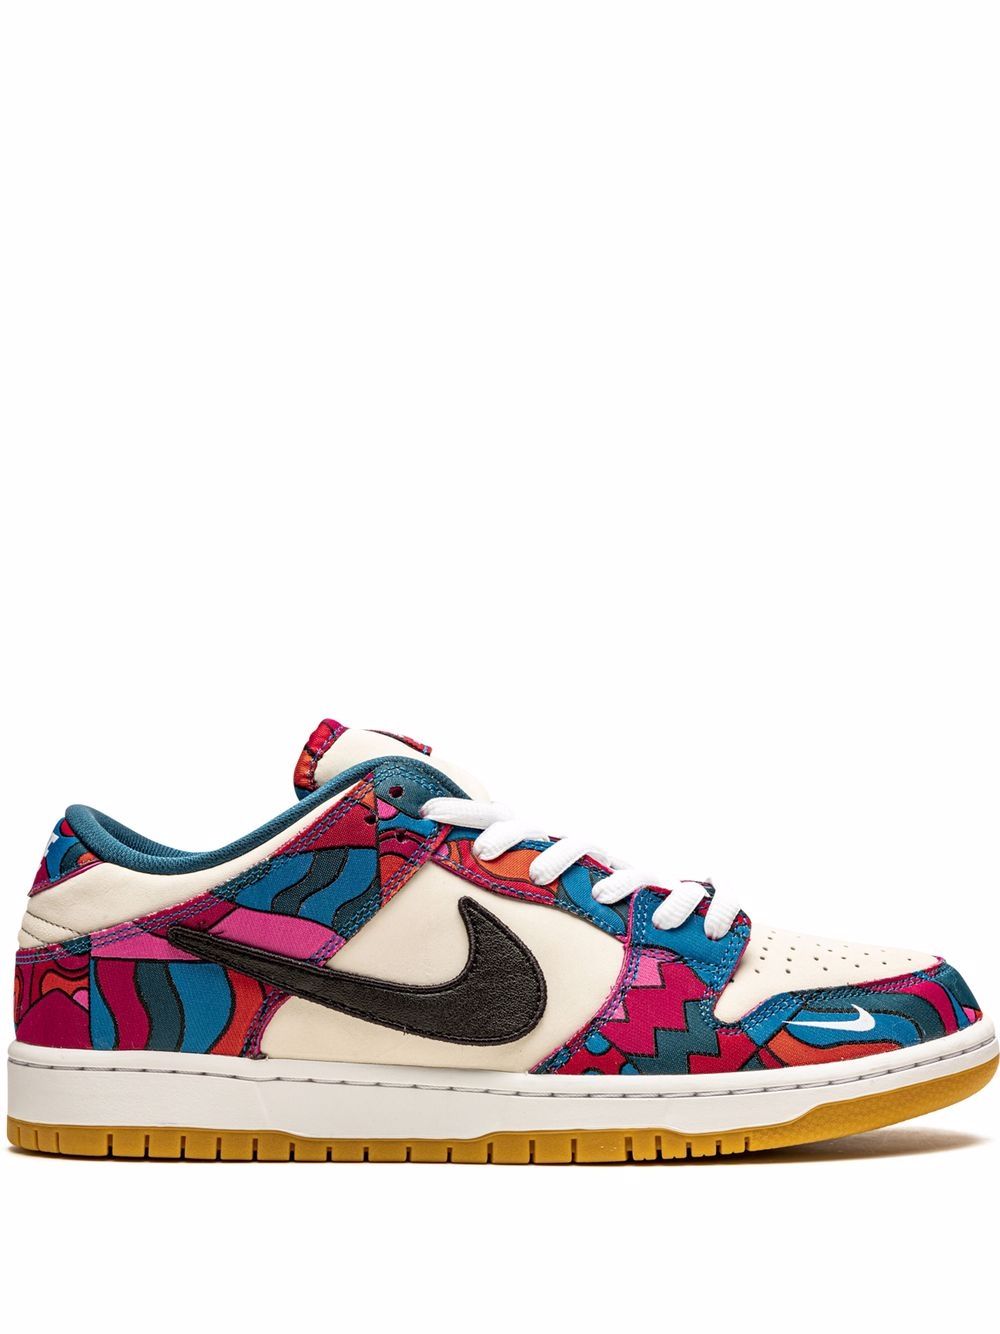 Image 1 of Nike x Parra Dunk Low SB "Abstract Art" sneakers